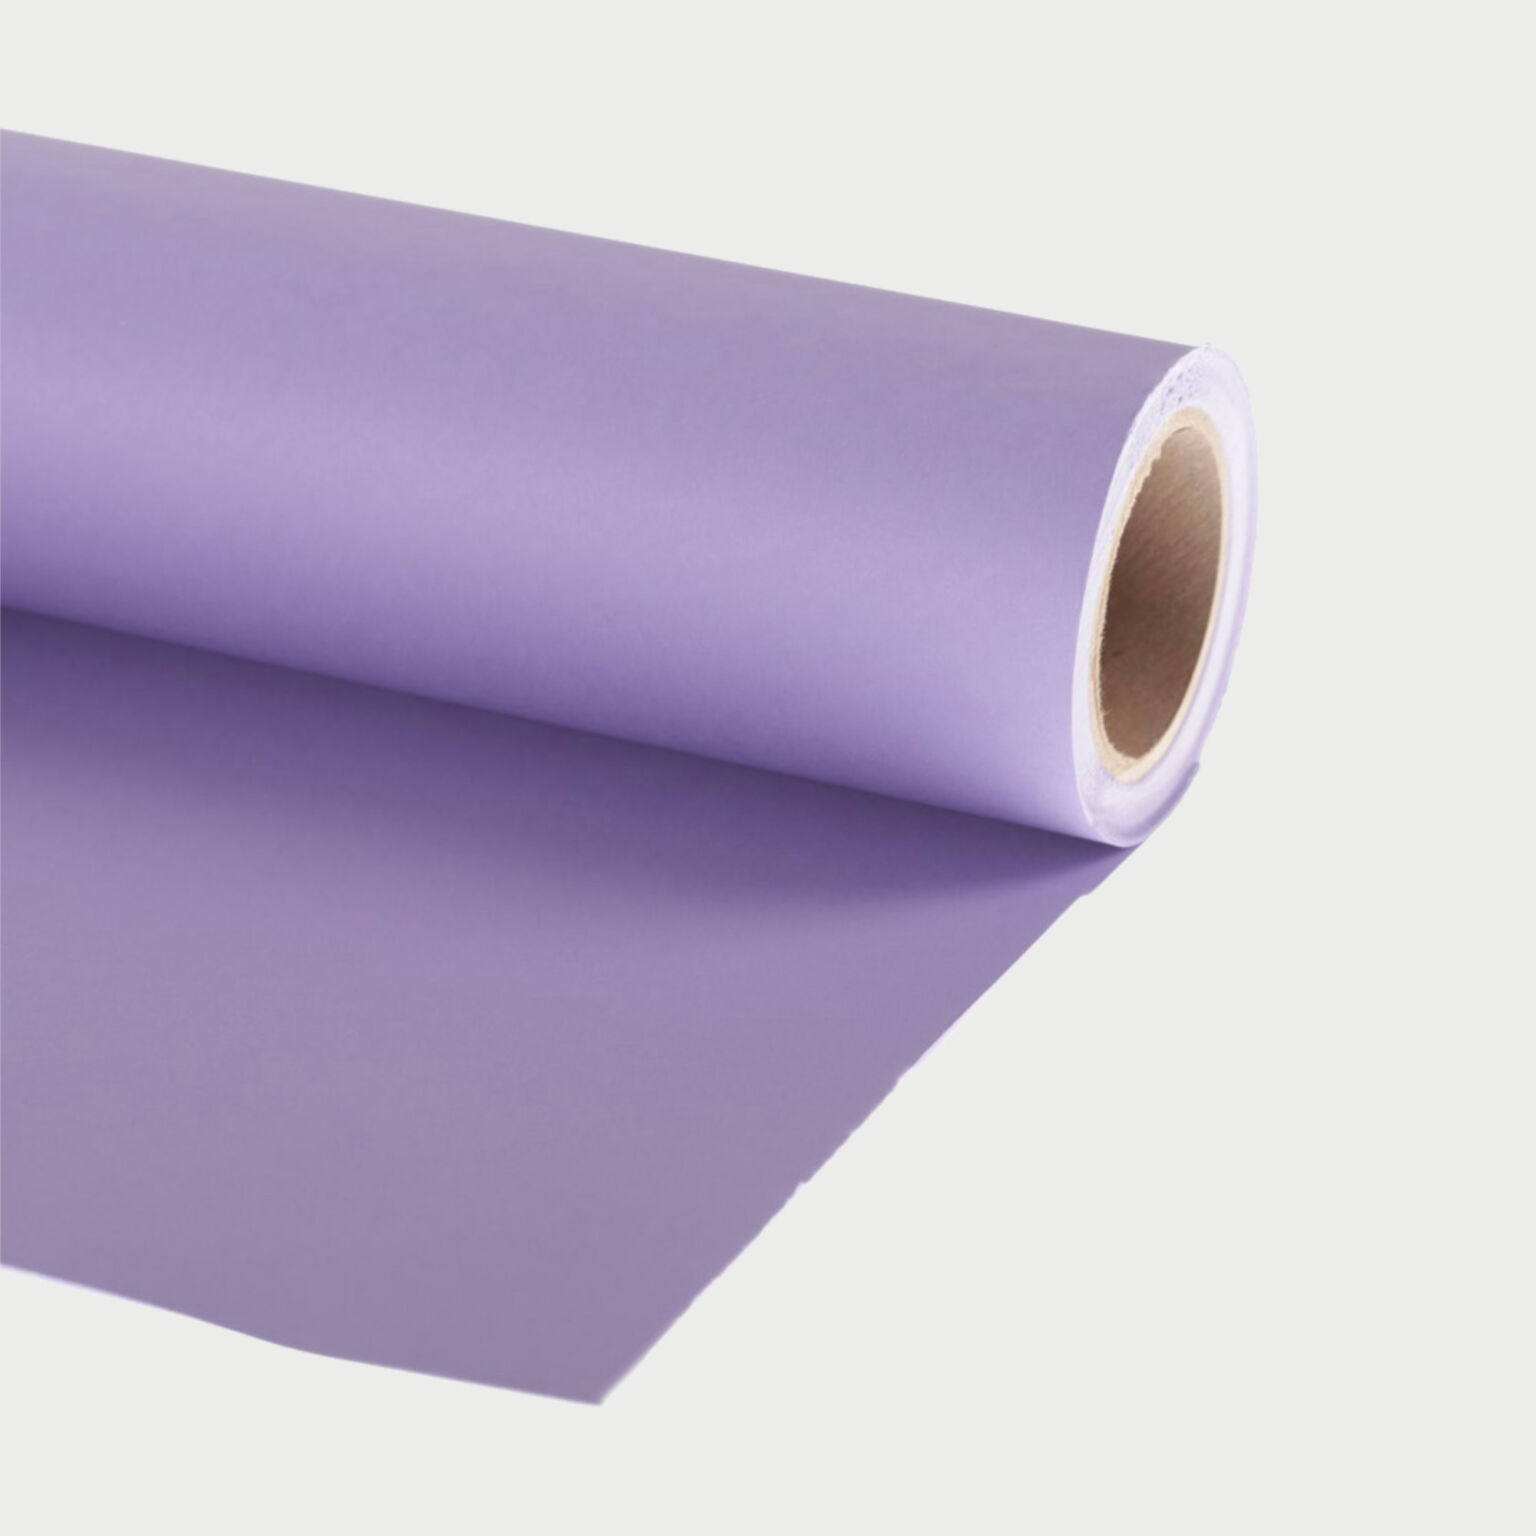 Manfrotto Paper Amethyst Seamless 2 72m X 11m